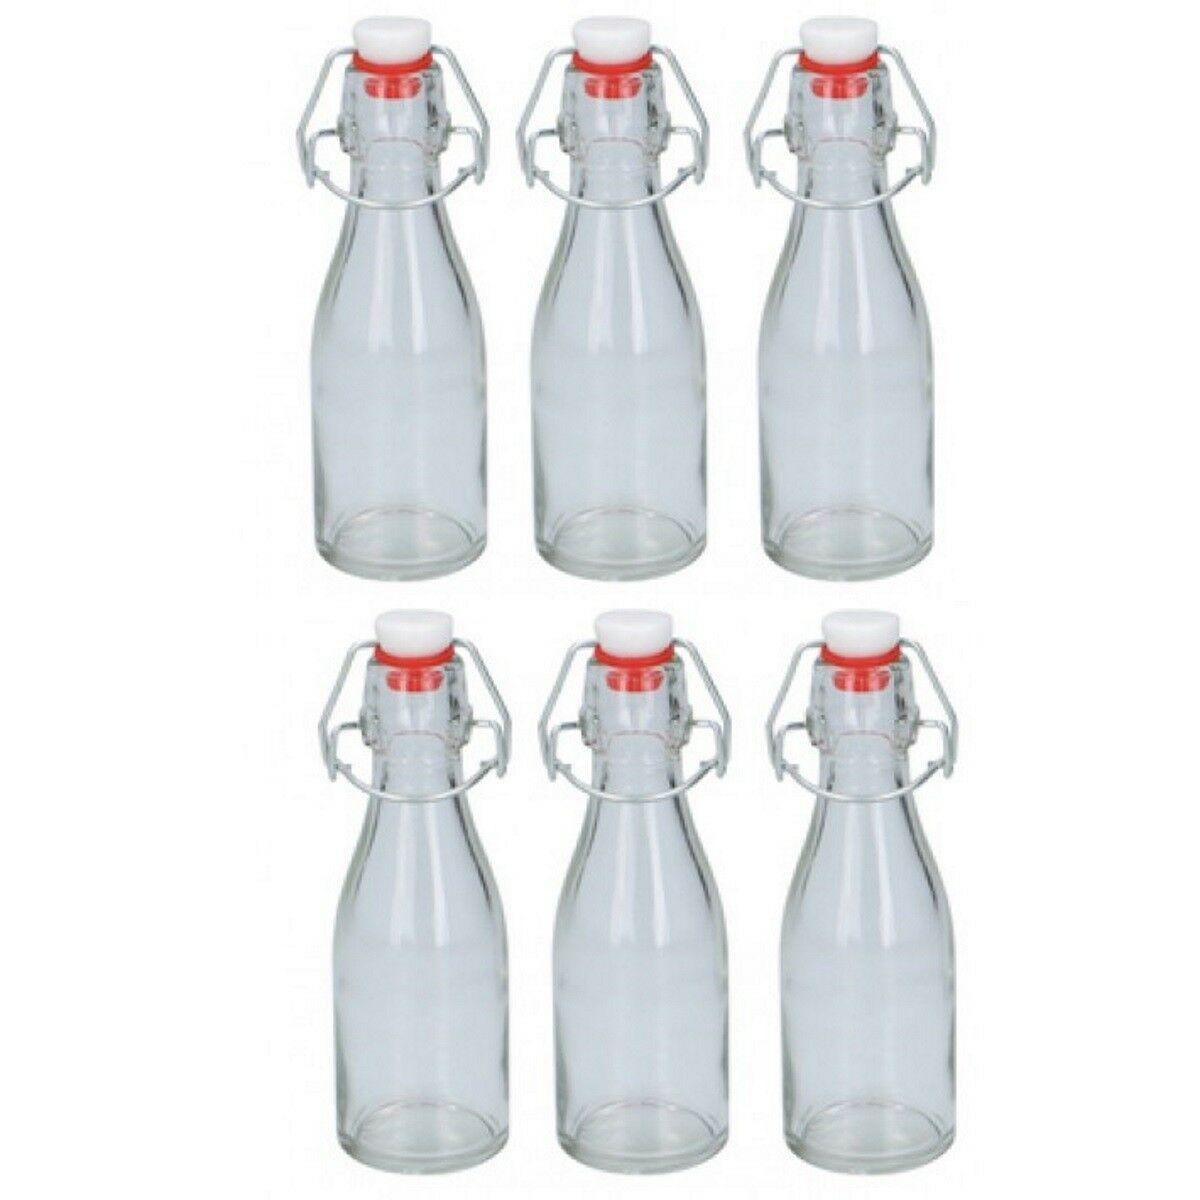 Glass Bottles With Swing Top Details about   Glass Bottles 